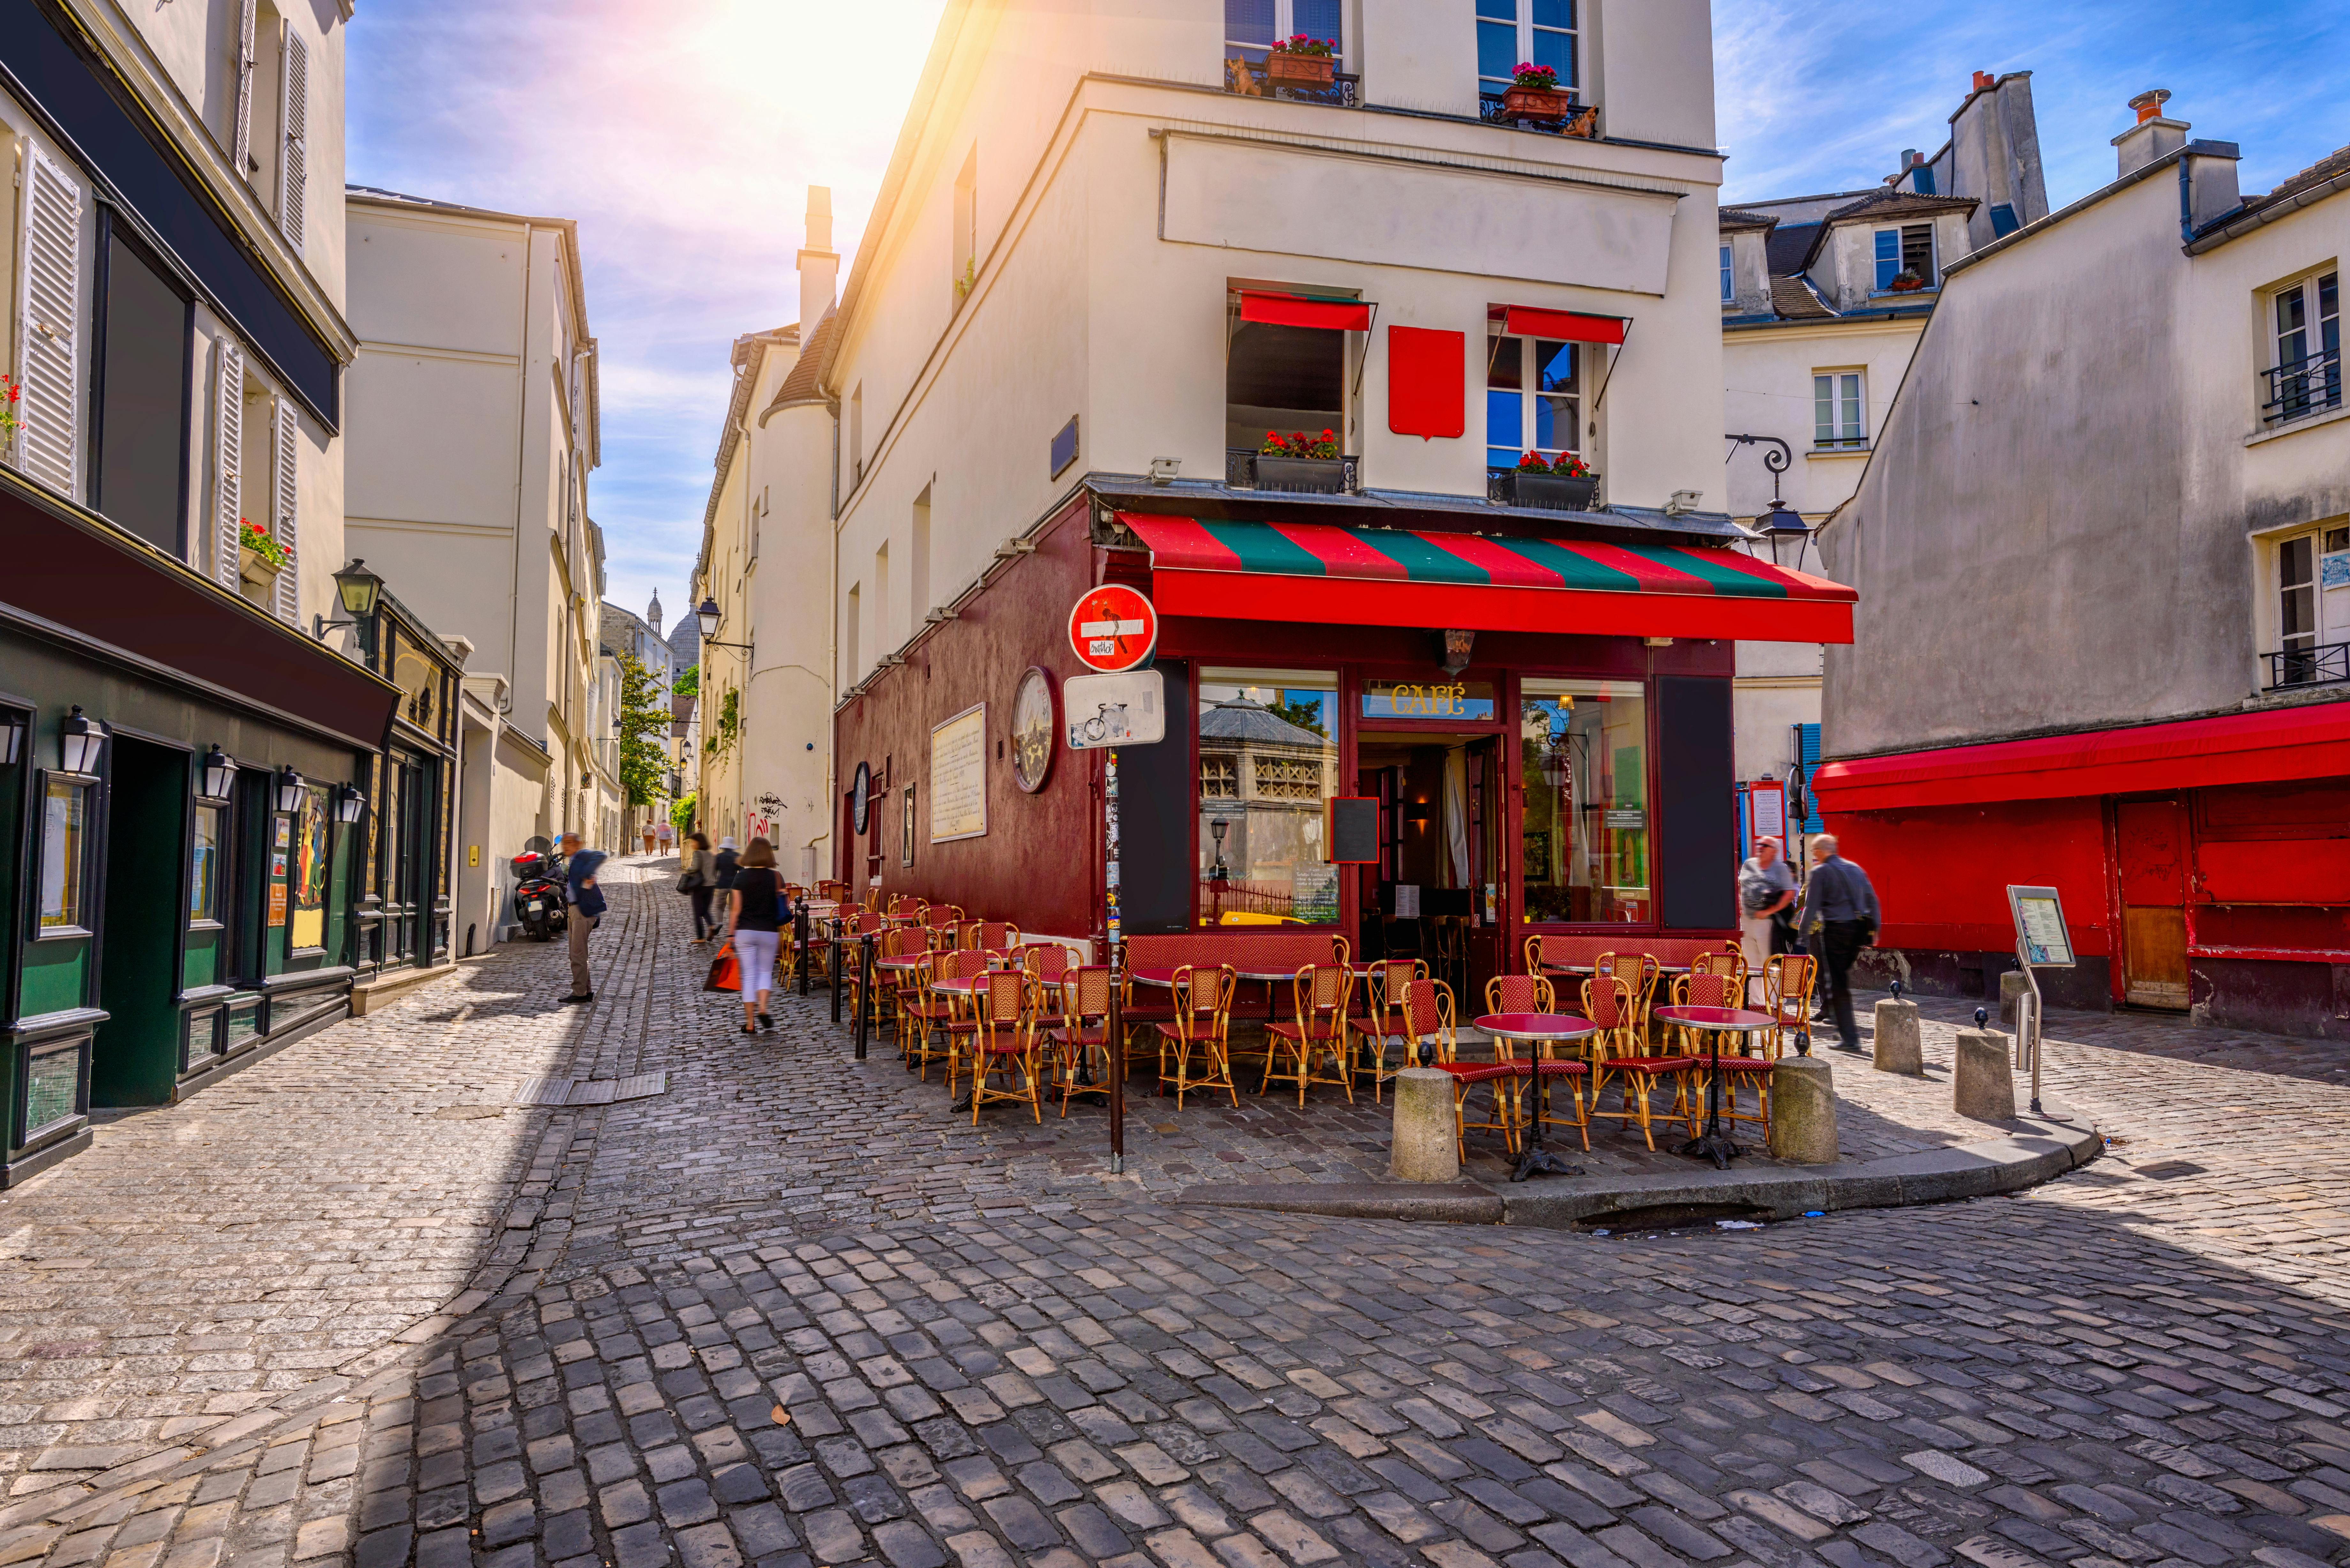 Bistrot and wine tasting tour in Montmartre